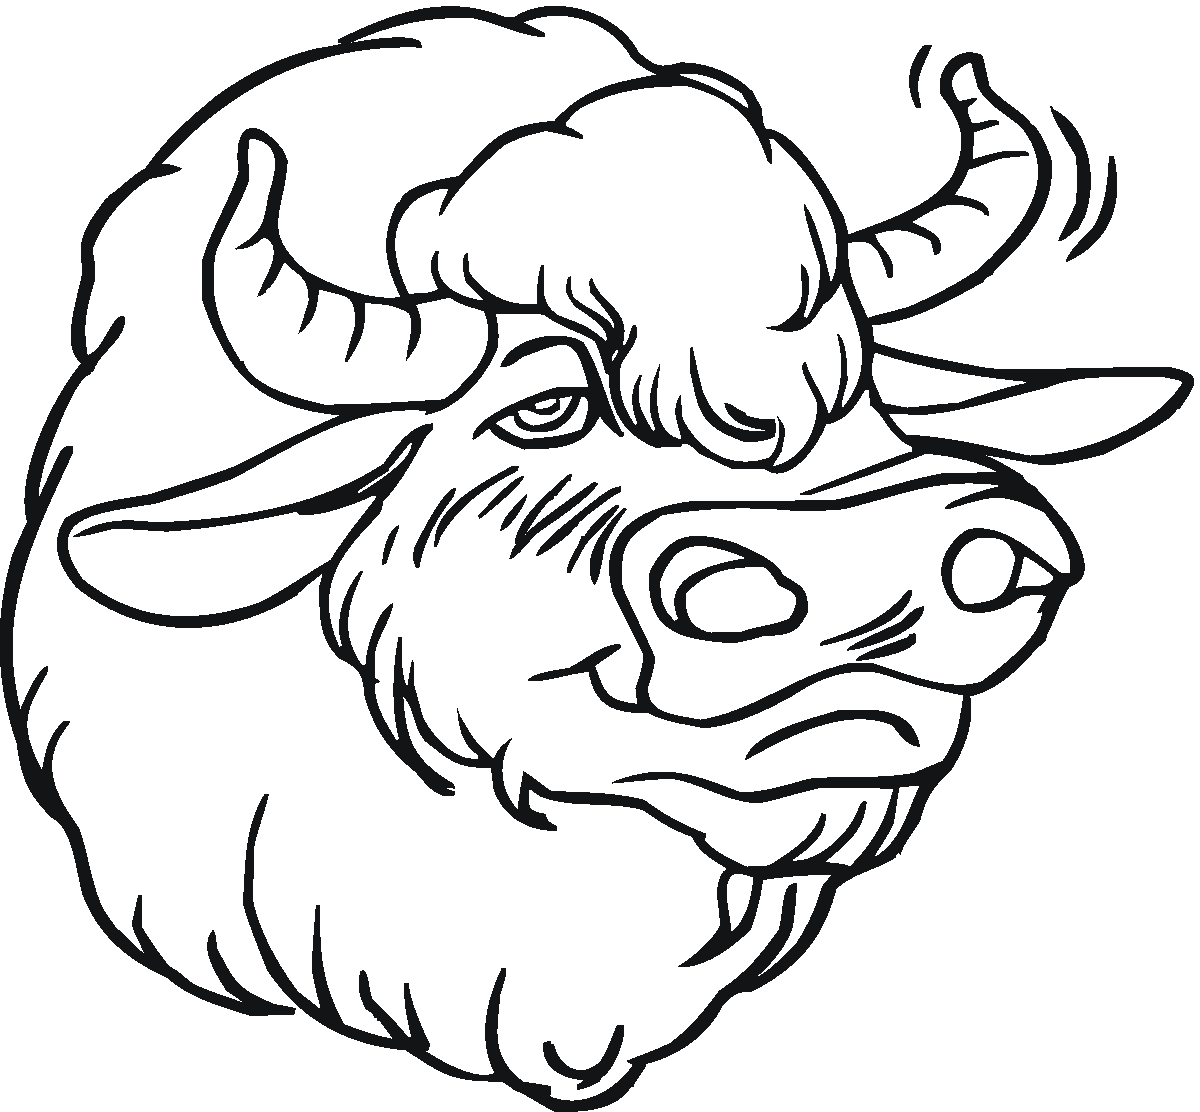 buffalo pictures to color 89 best buffalo and bison sketches images on pinterest pictures color to buffalo 